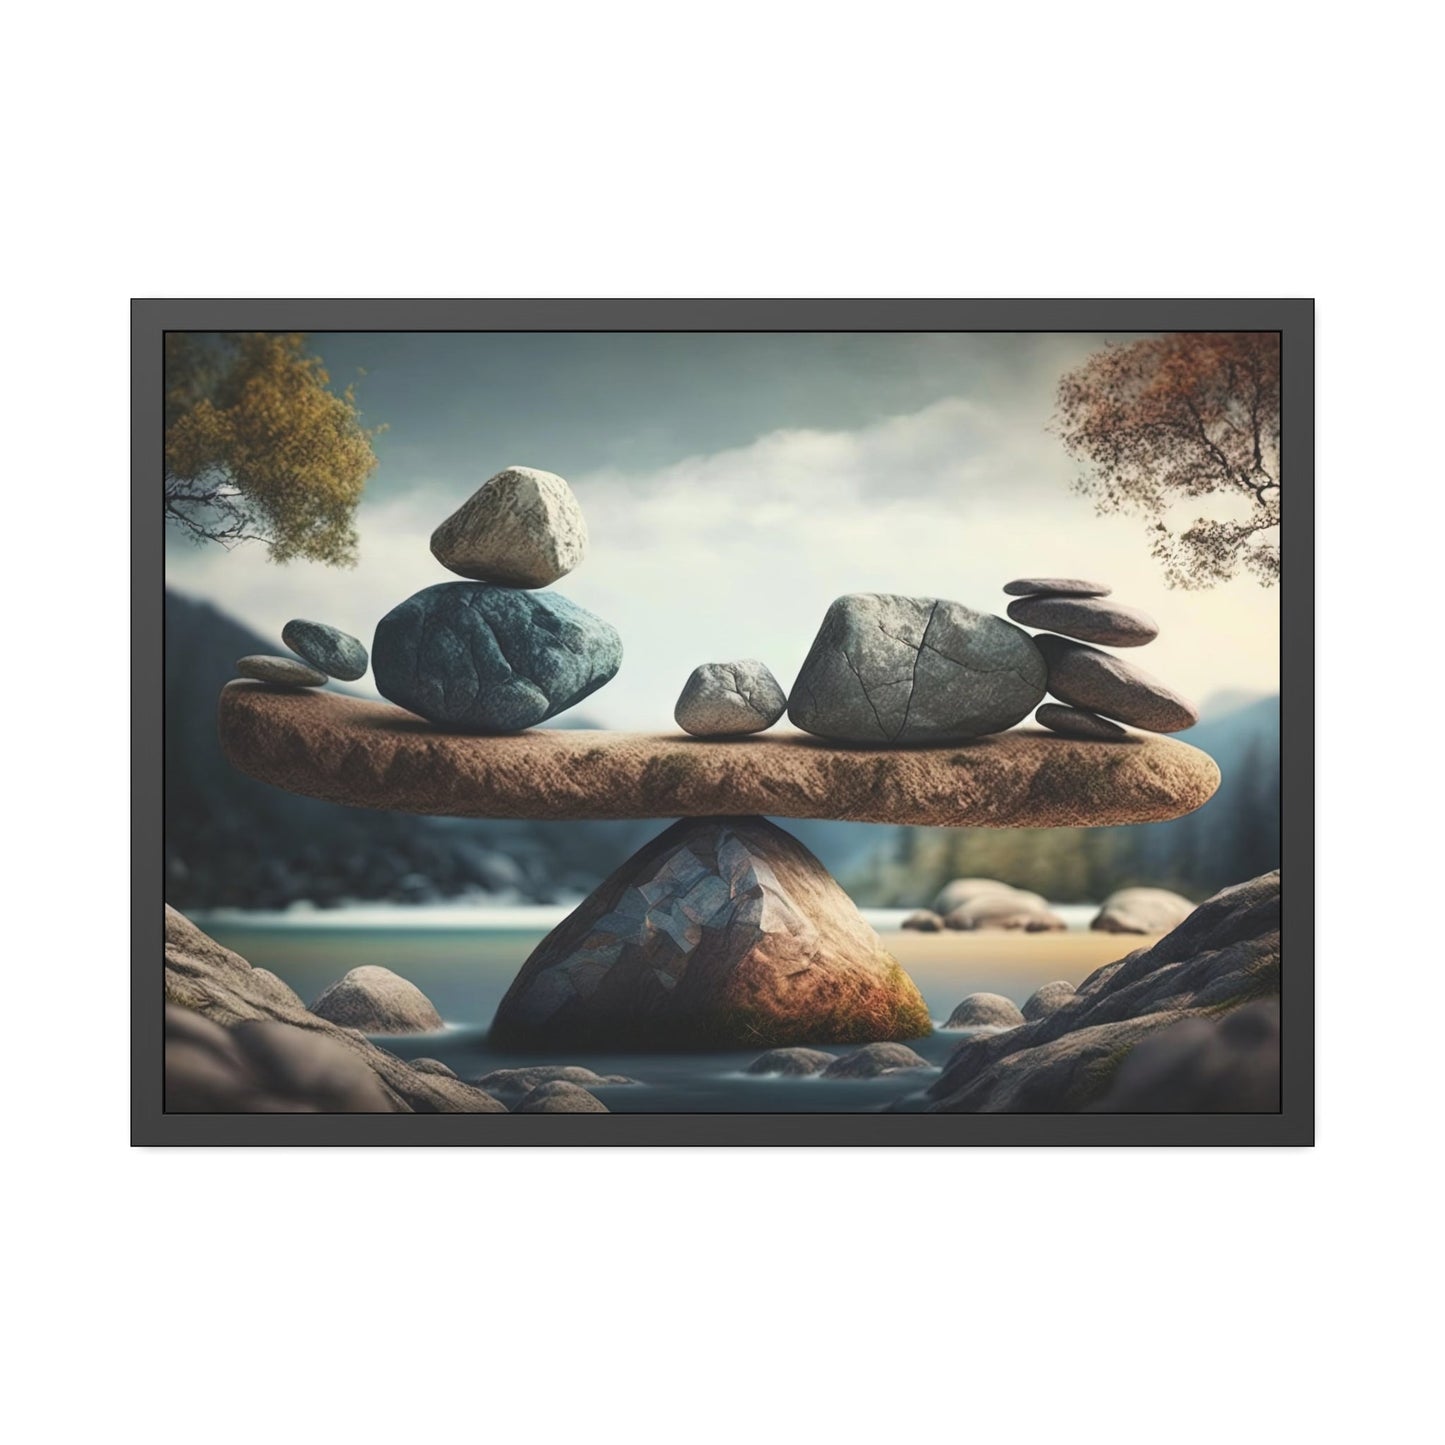 The Gift of Relaxation: Art Print on Framed Canvas for a Peaceful Home